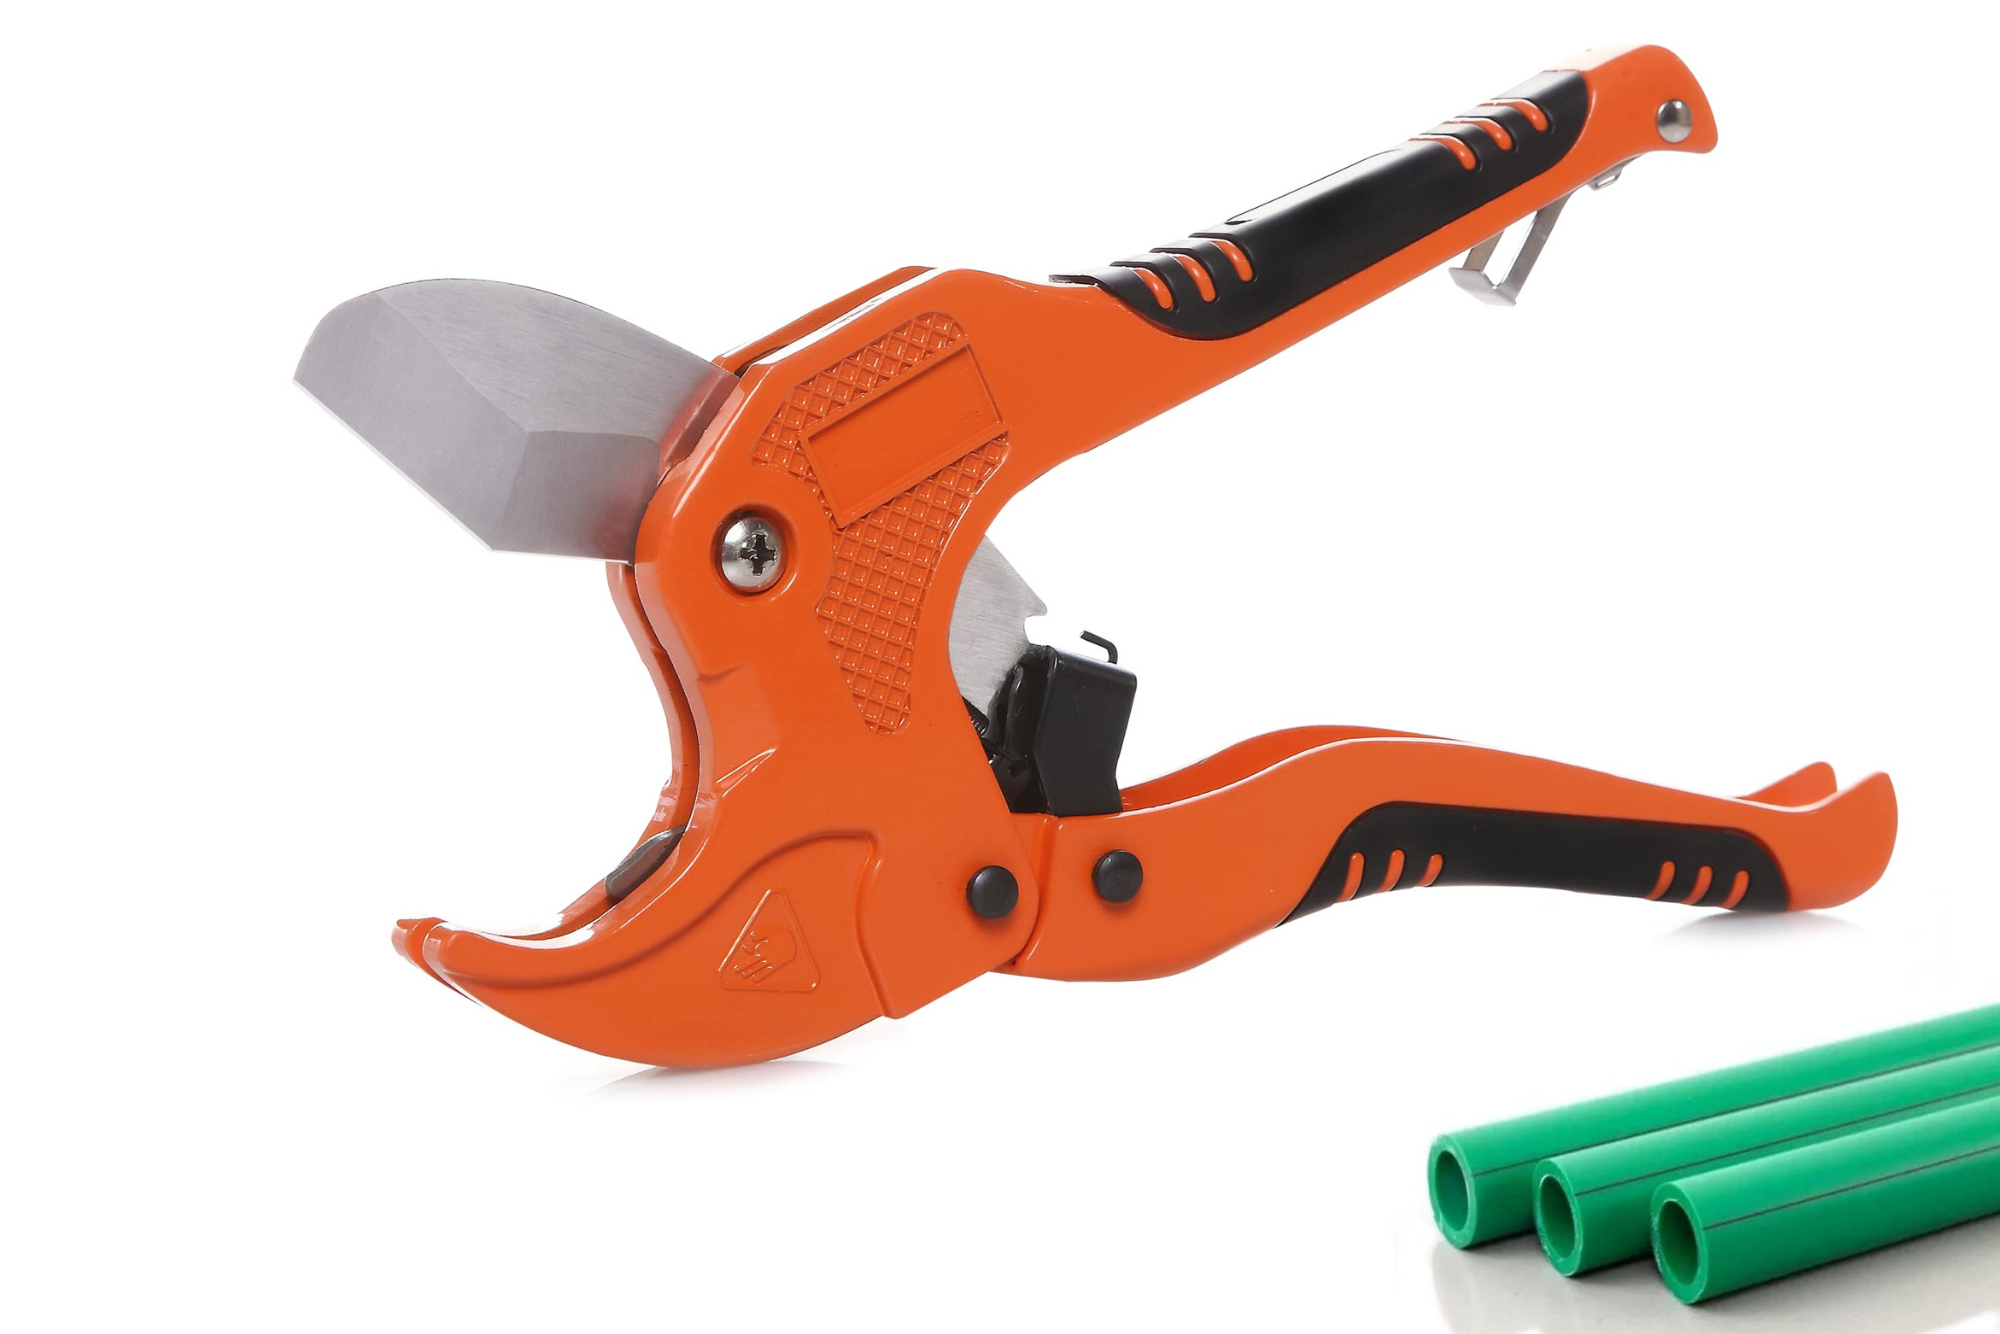 What Are The Parts Of A Ratchet Pipe Cutter?